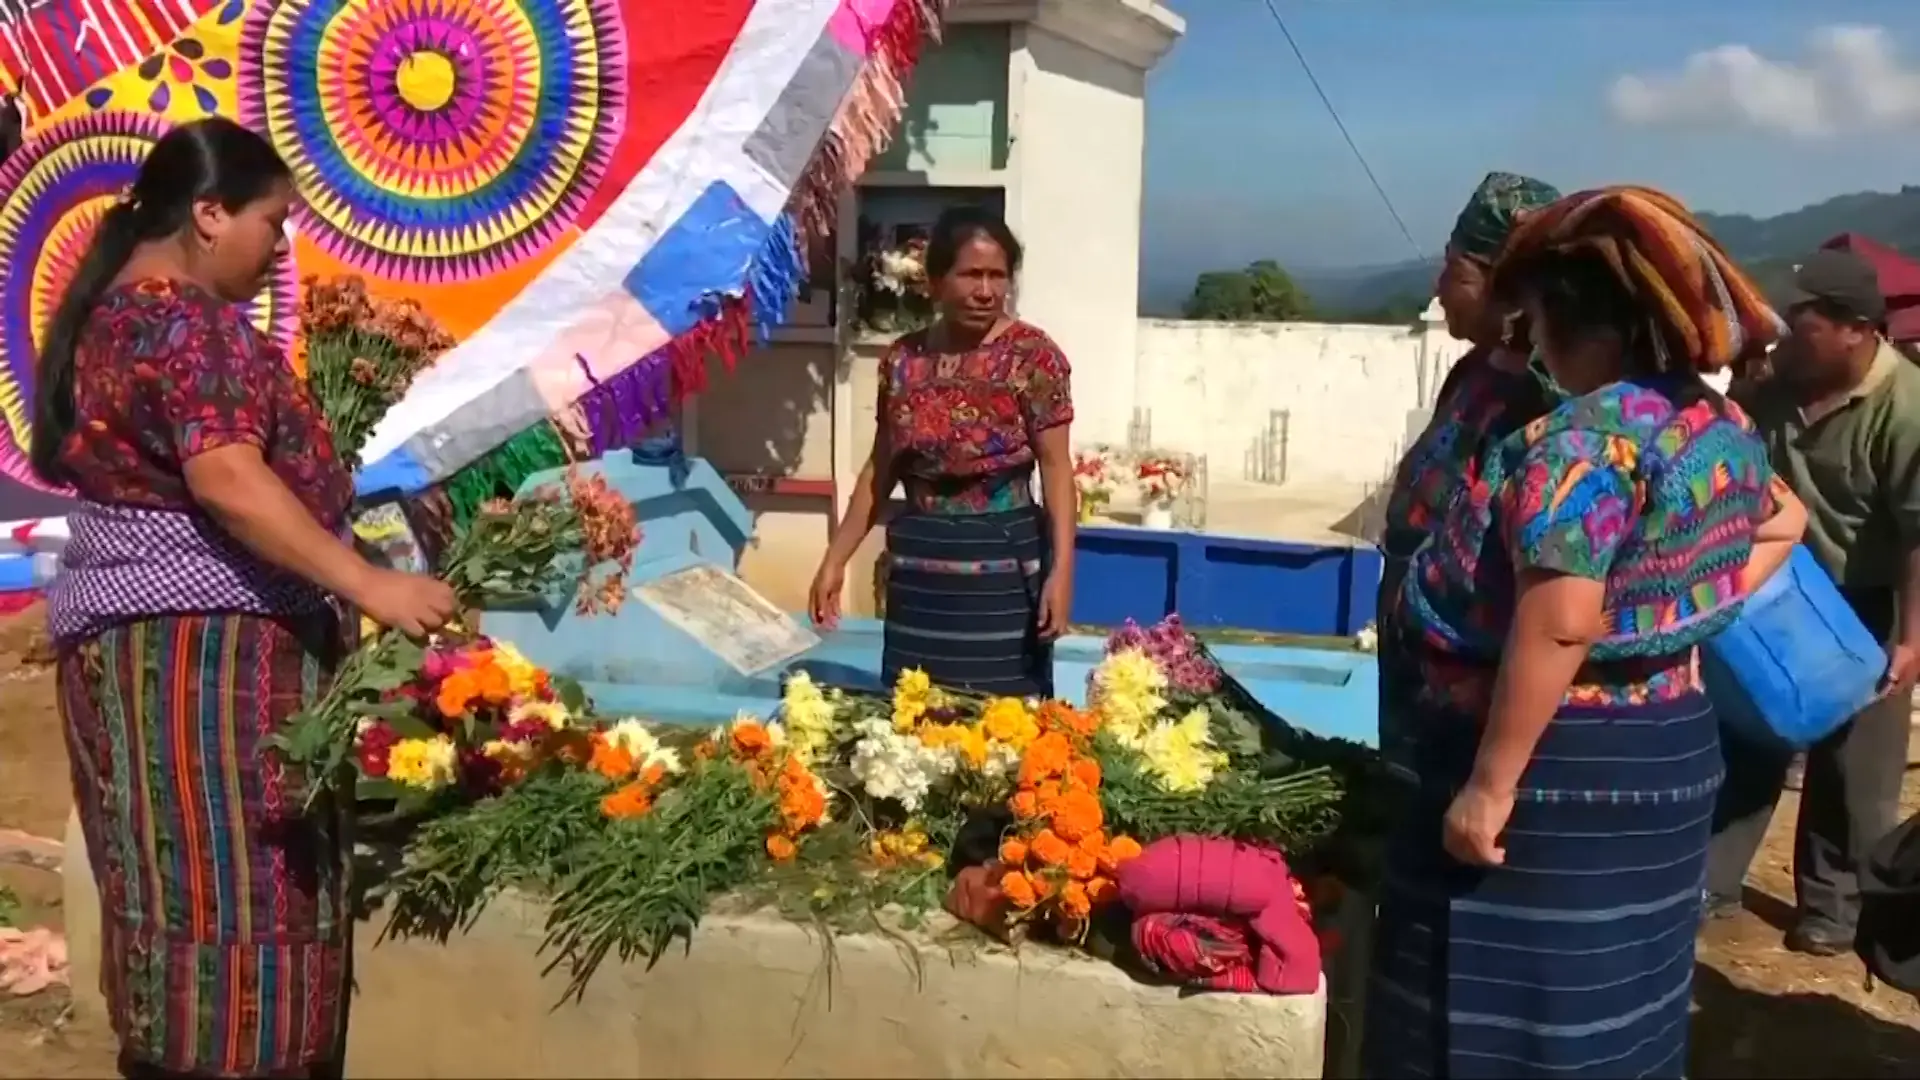 Maya women in traditional clothing placing orange marigolds and other flowers on a raised grave.  A giant kite is visible over the grave, as are additional graves.